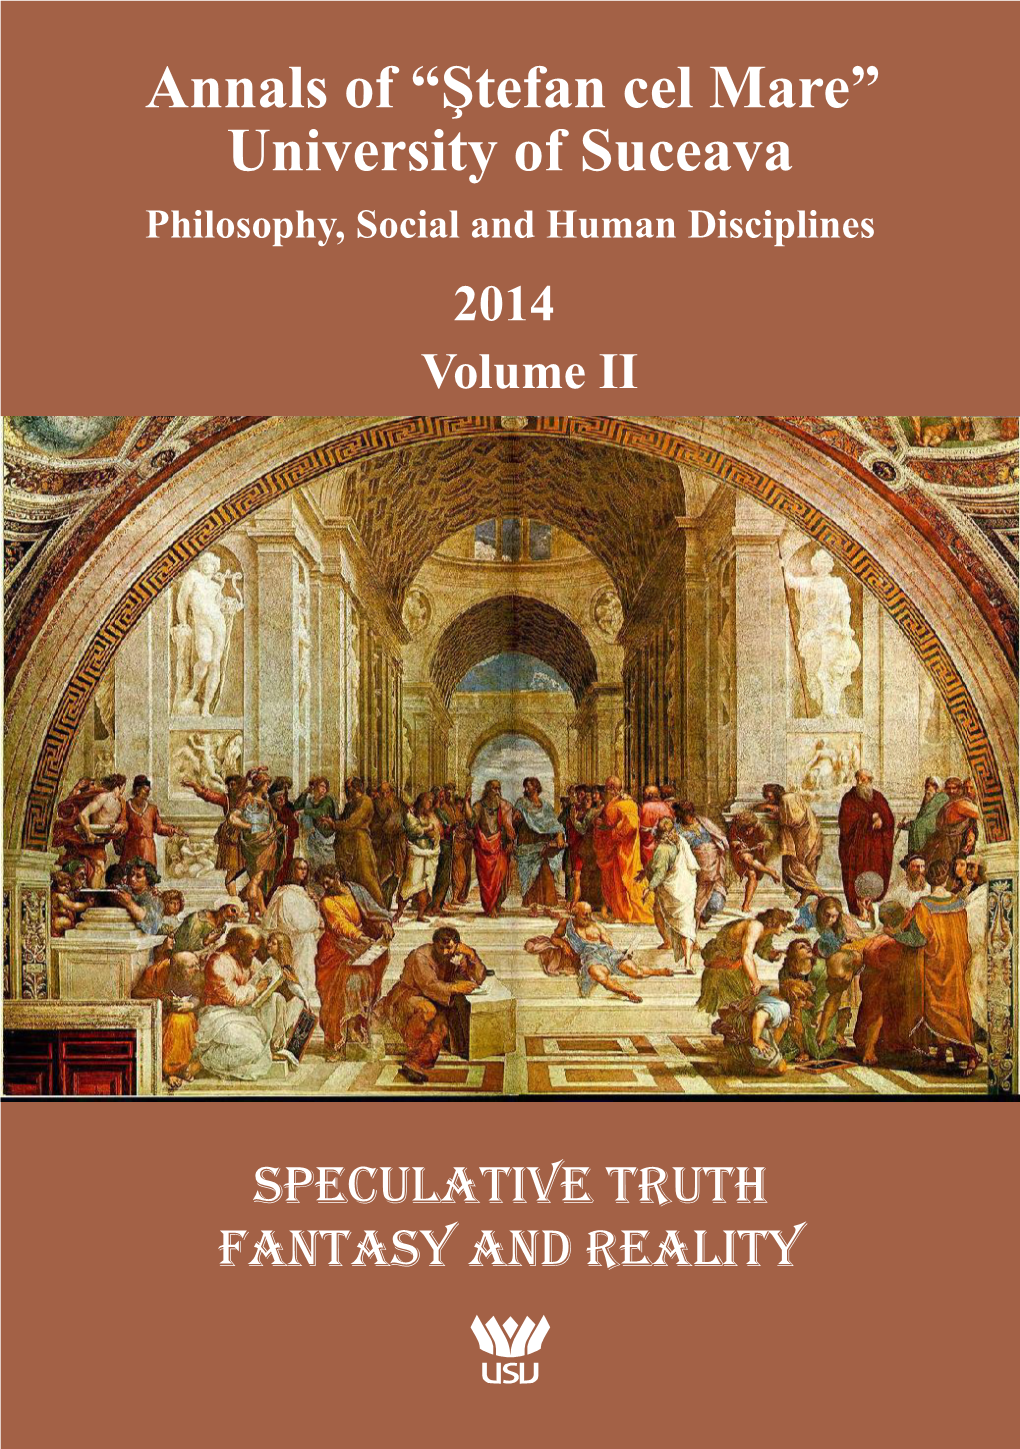 ANNALS of Philosophy, Social and Human Disciplines